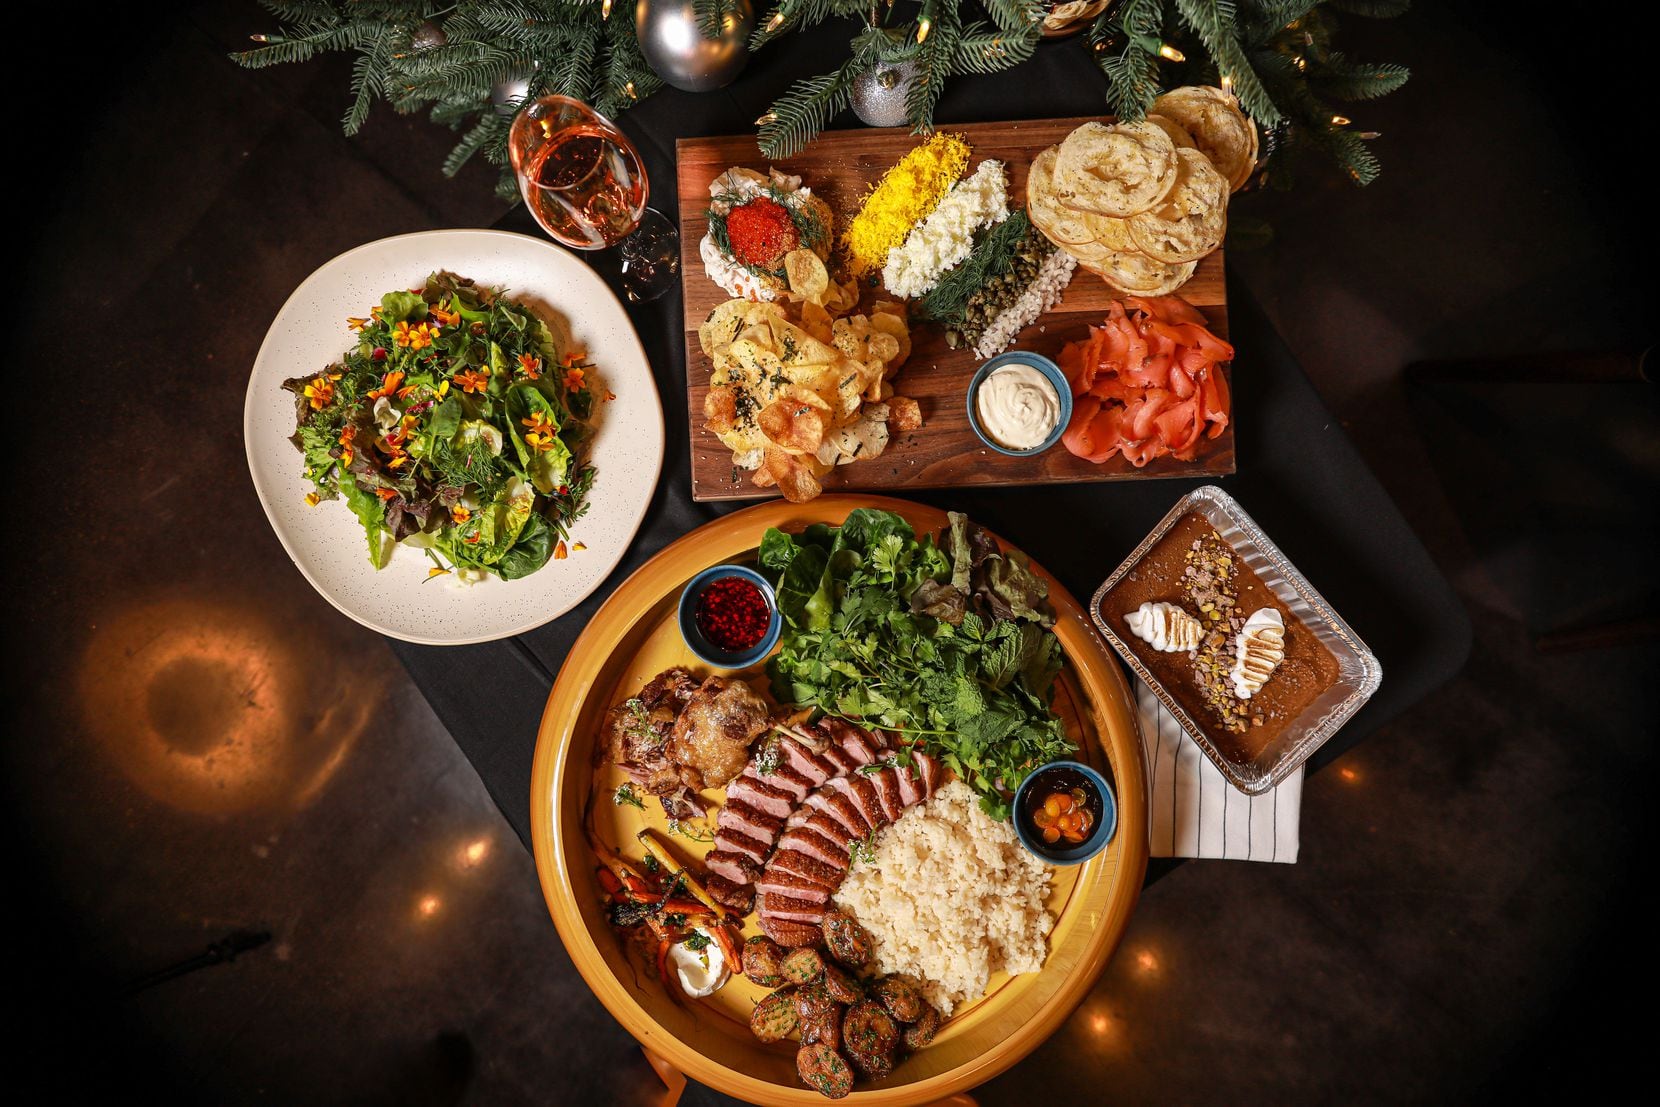 Rise + Thyme is offering take-home Christmas meals this holiday season.